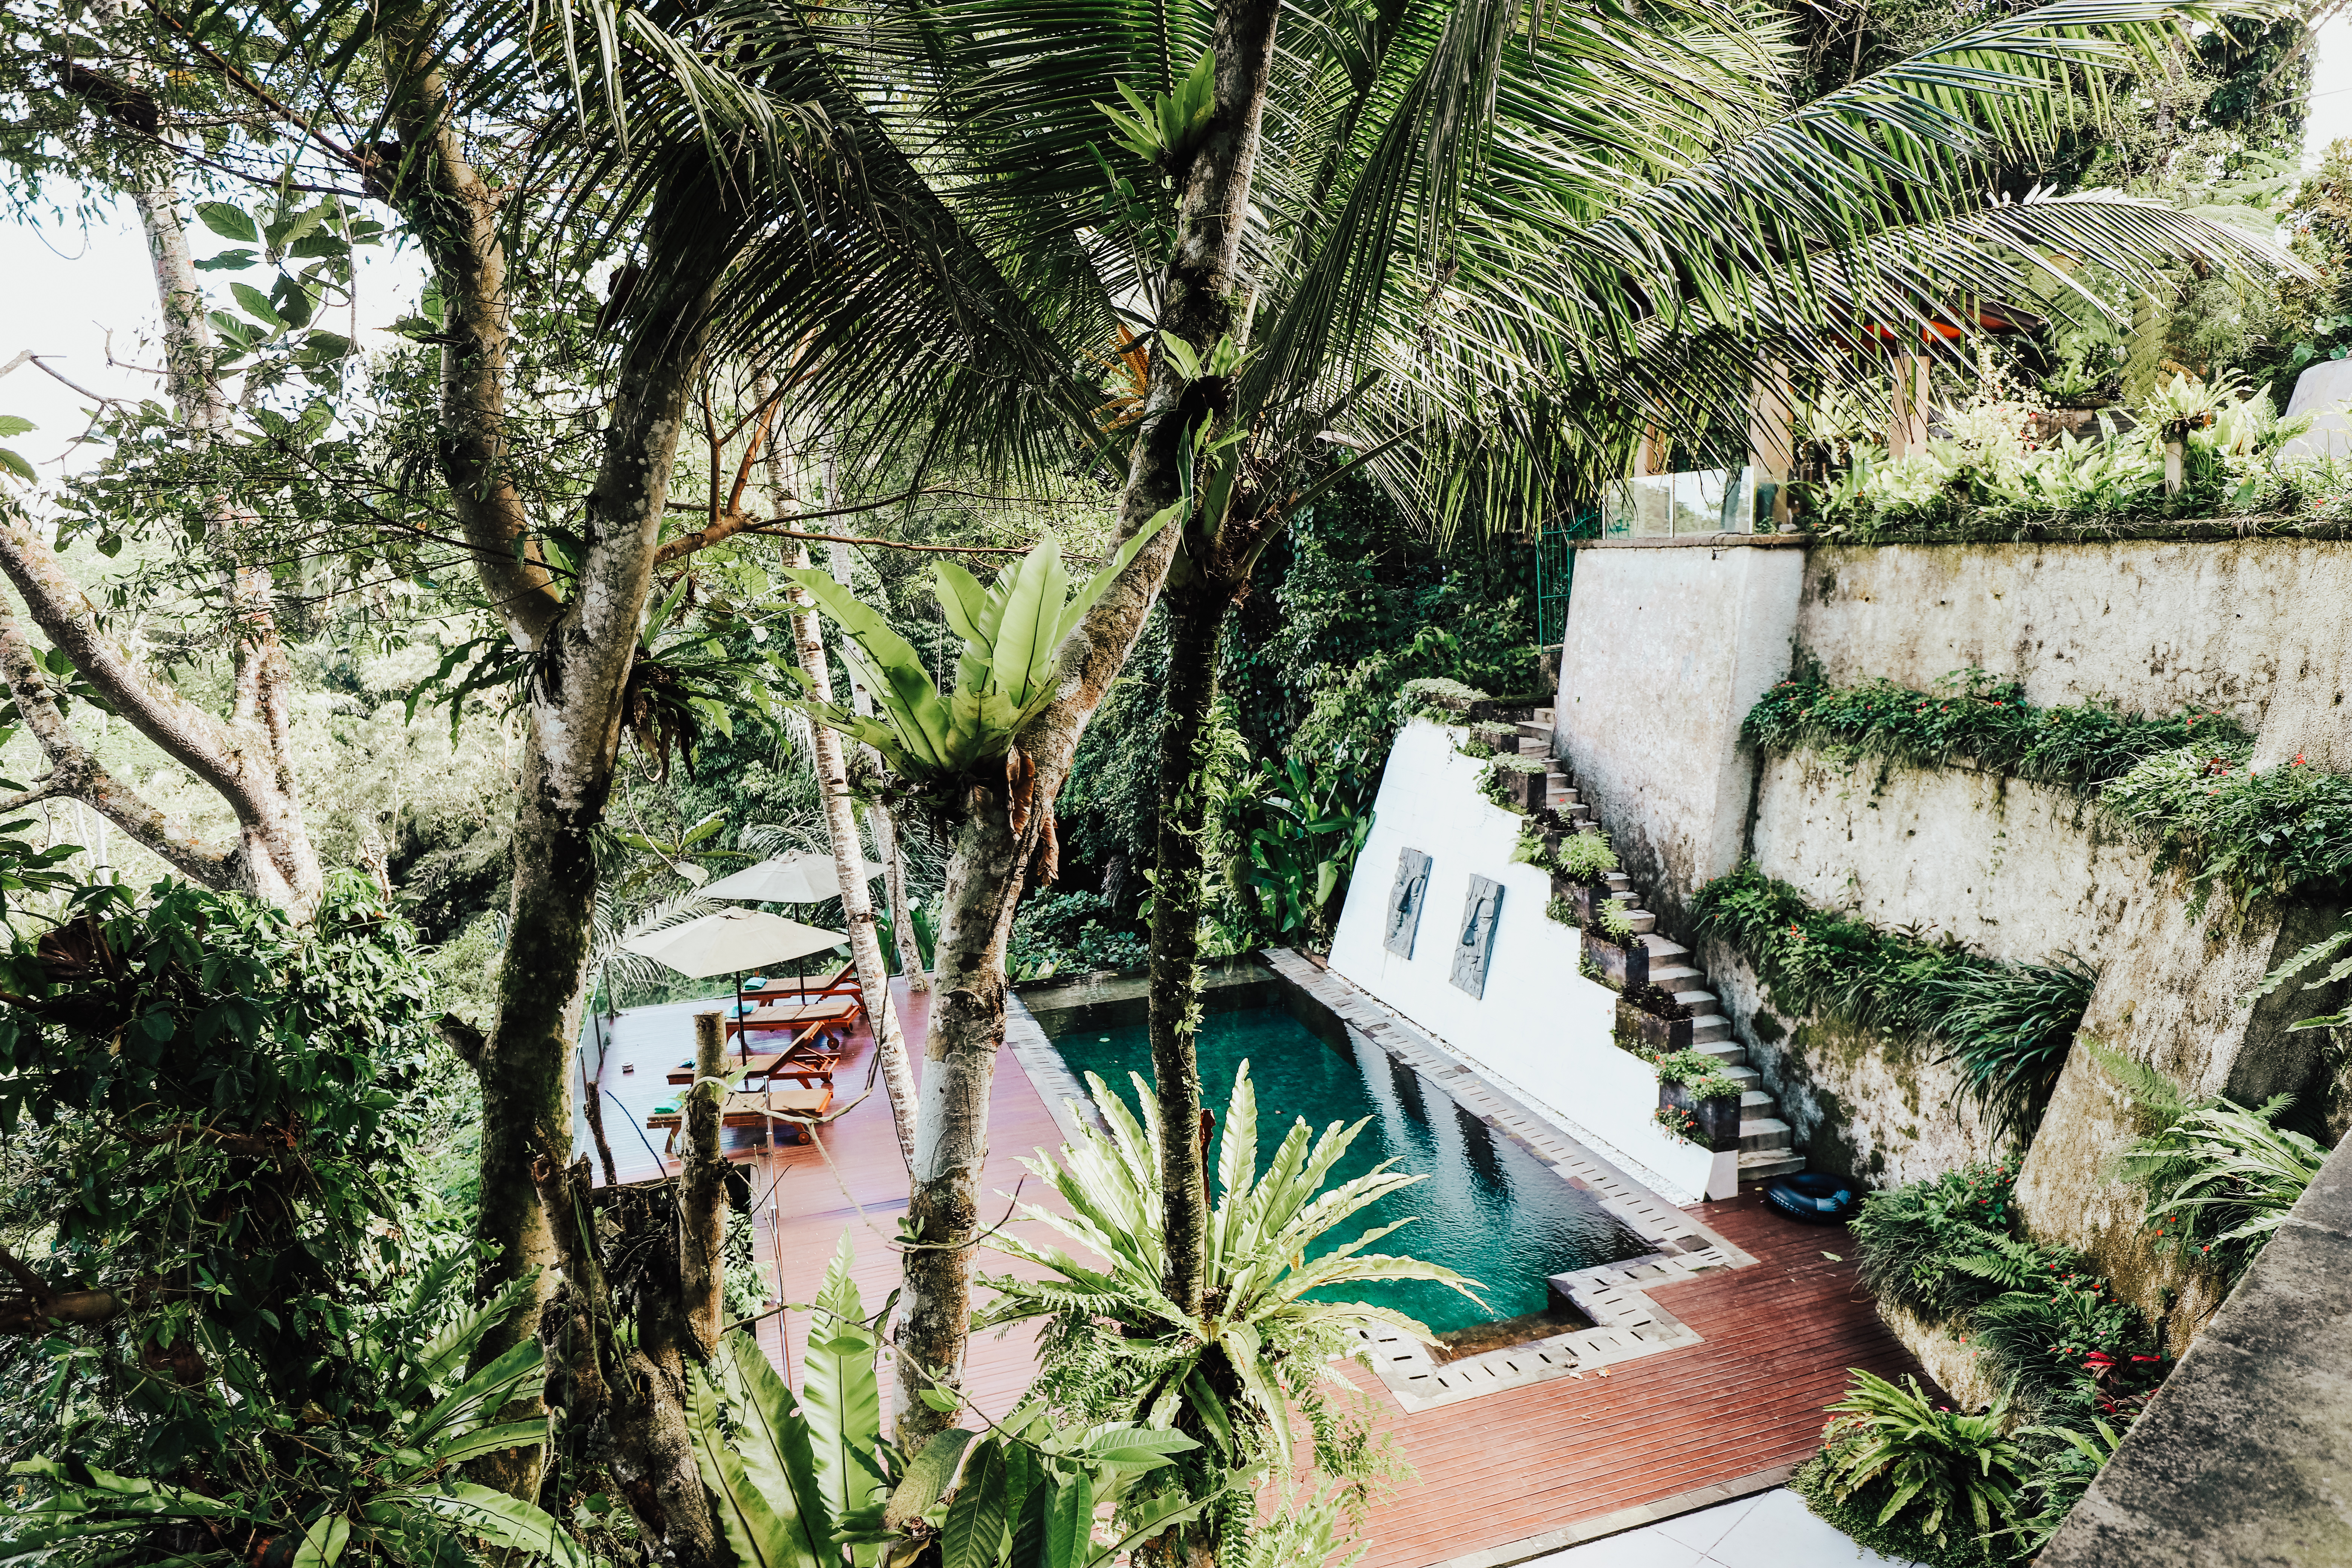 San Francisco blogger Ashley Zeal from Two Peas in a Prada shares her Ubud Travel Guide. Find out where to stay, where to eat and what to do in Ubud, Bali. 